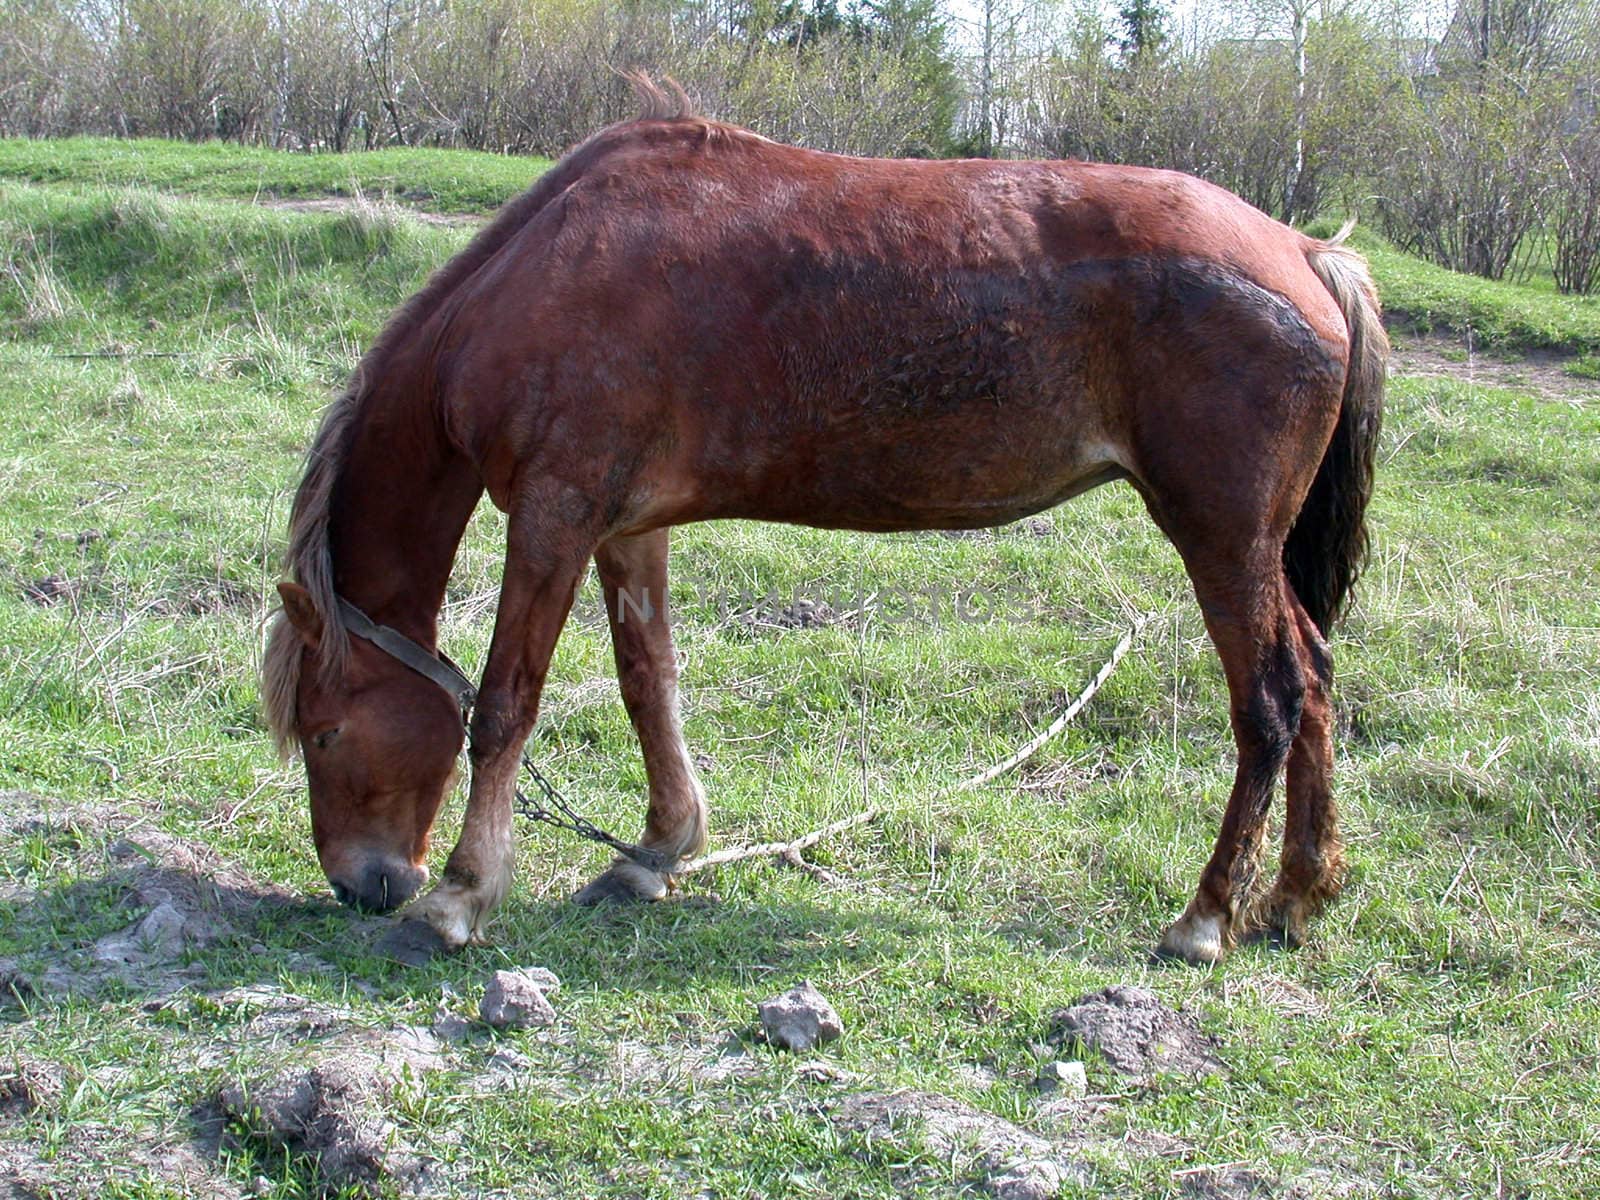 The horse grazes on meadow